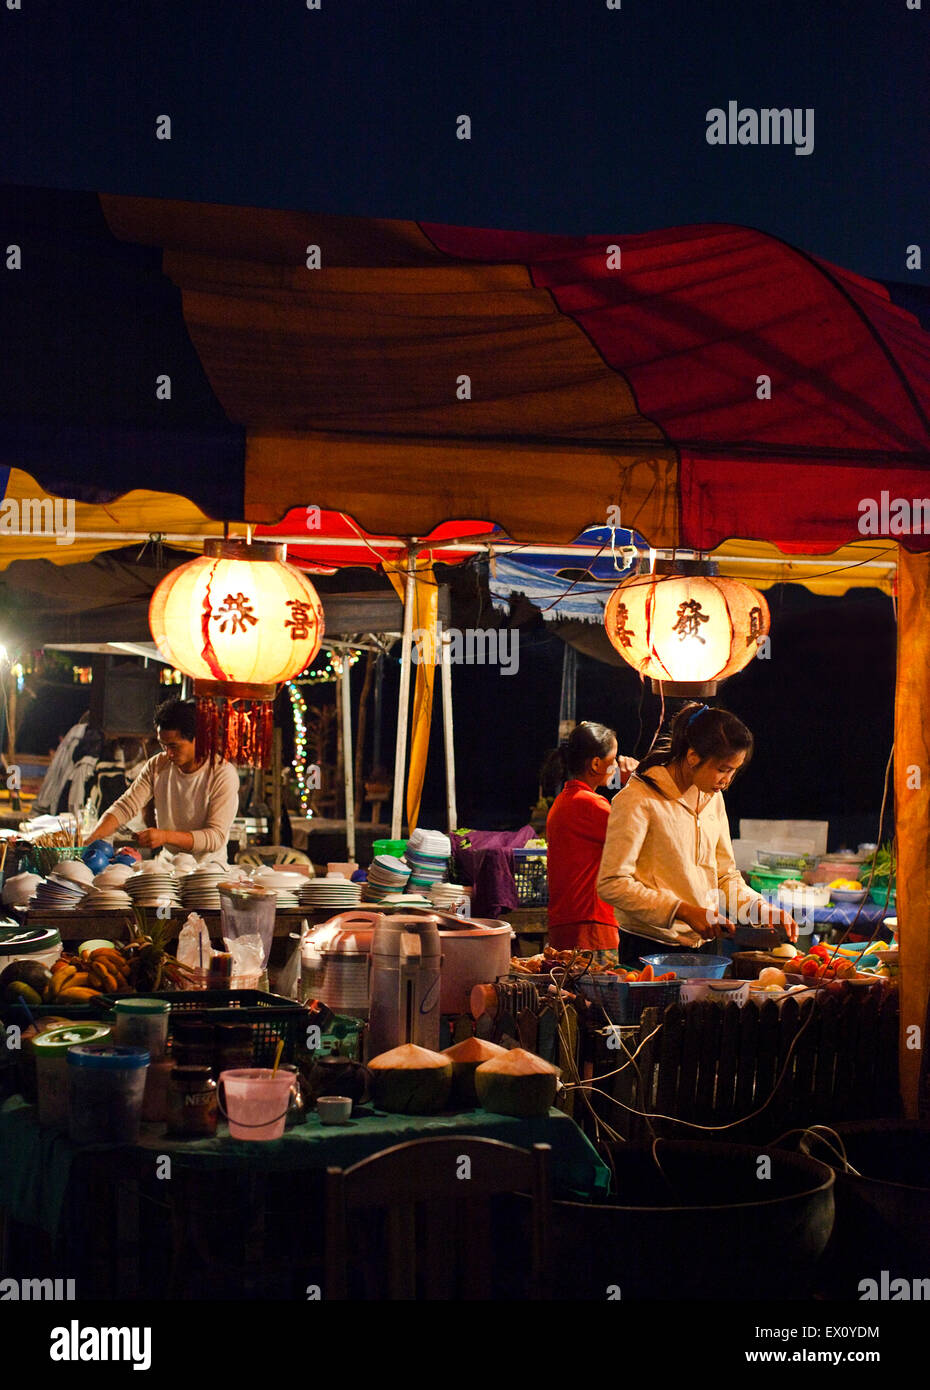 Food stall vendors at the night market by the Mekong River, Quai Fa Ngum, Vientiane, Laos P.D.R. Stock Photo